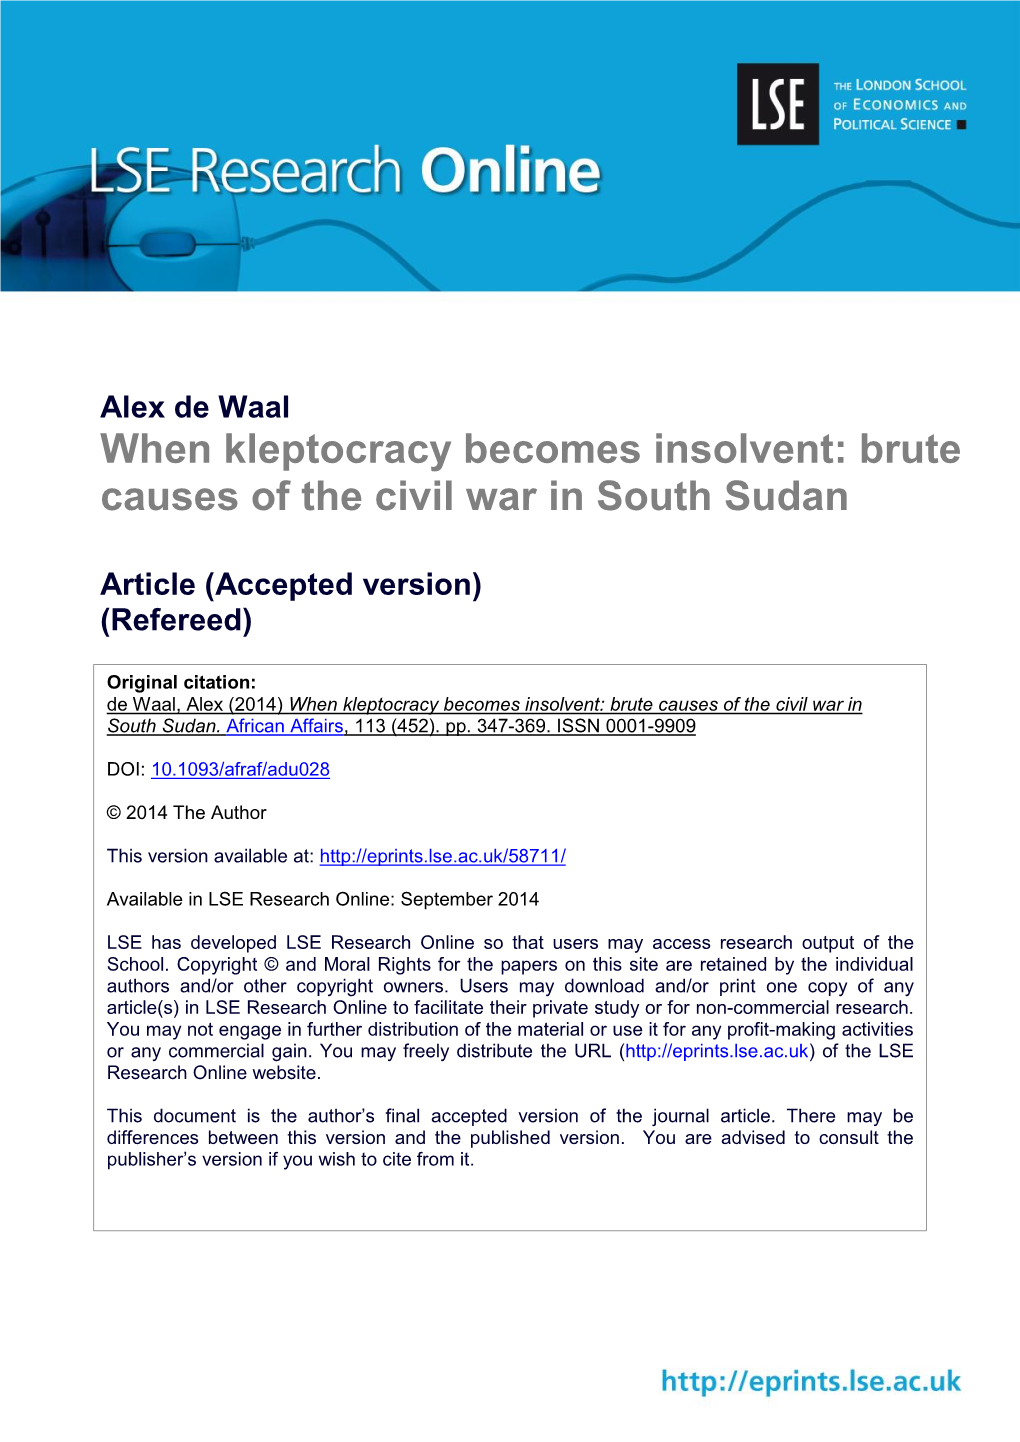 Alex De Waal When Kleptocracy Becomes Insolvent: Brute Causes of the Civil War in South Sudan